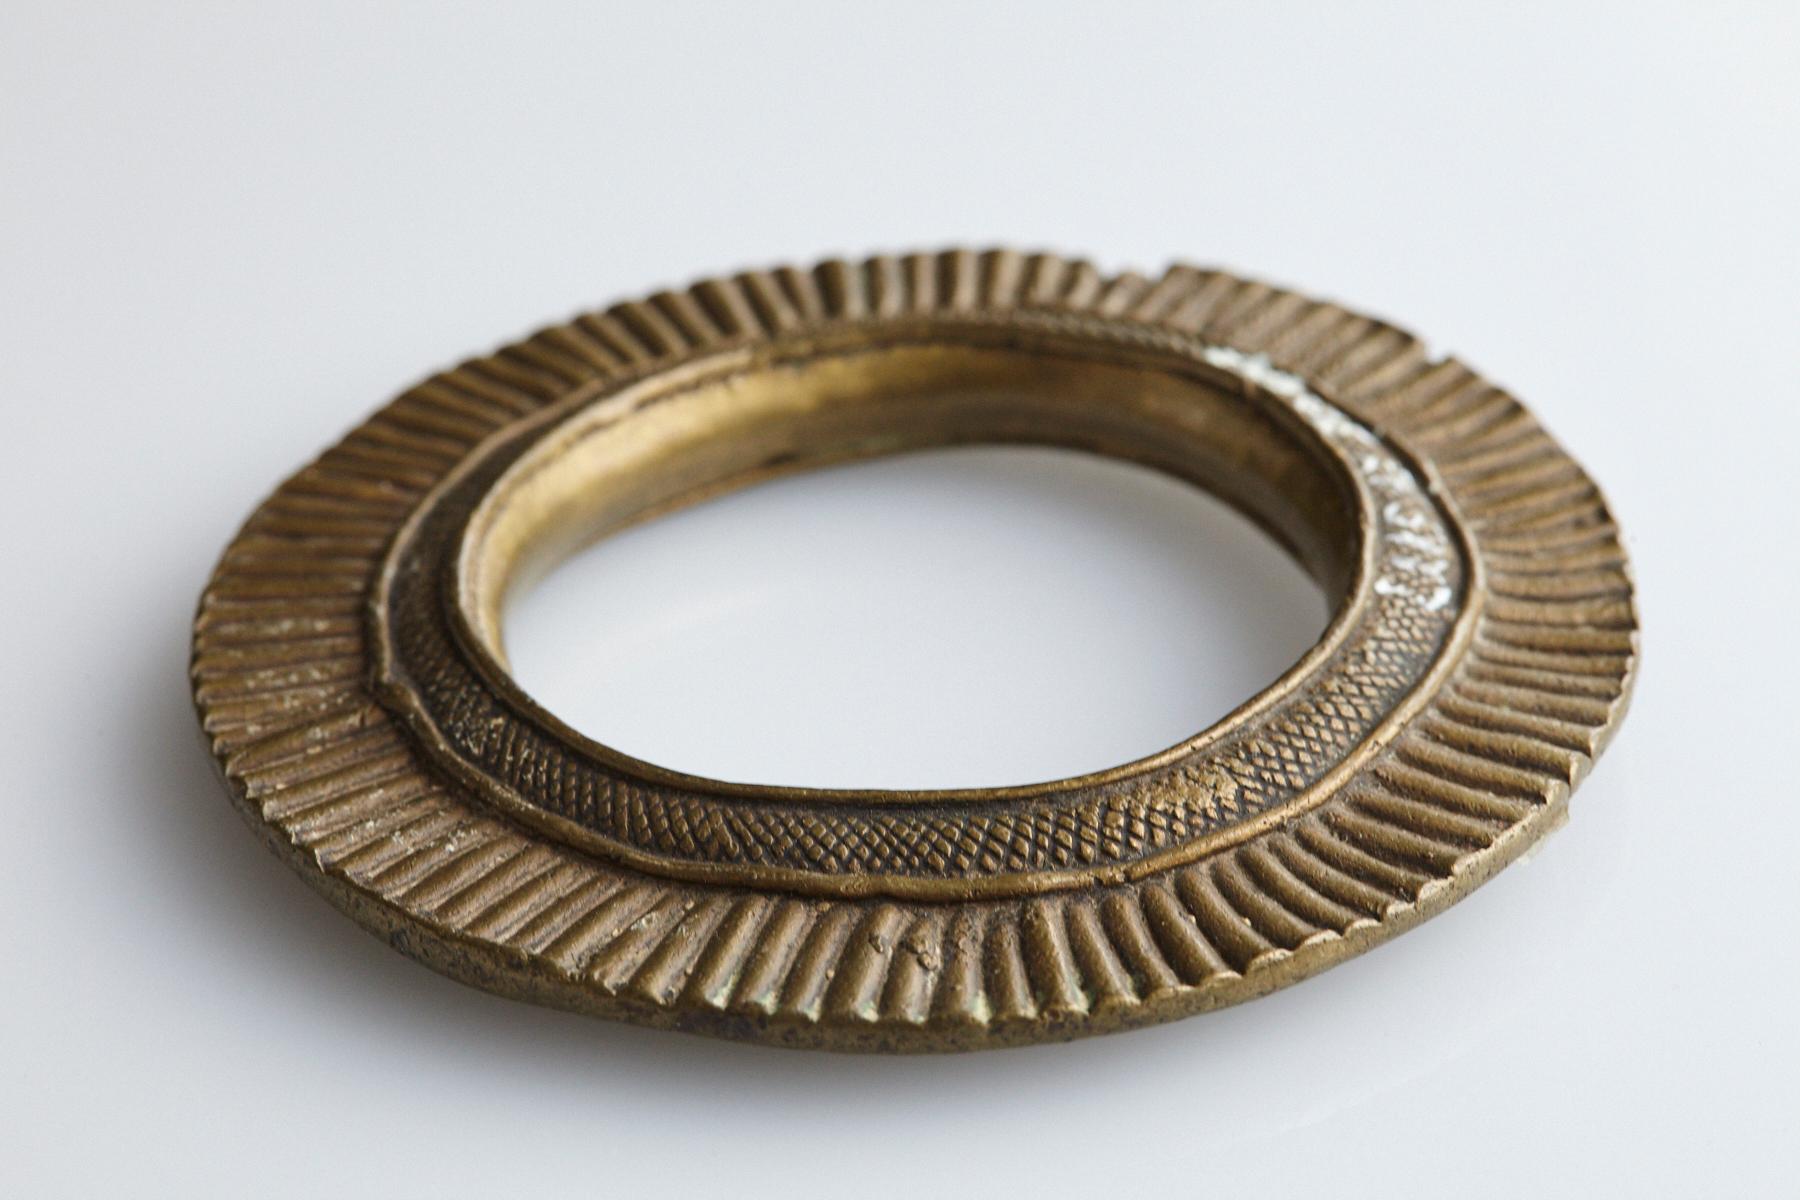 Bronze Currency Bracelet/Manilla, Beri People, Sudan, 19th Century - No 1 In Good Condition For Sale In Aramits, Nouvelle-Aquitaine